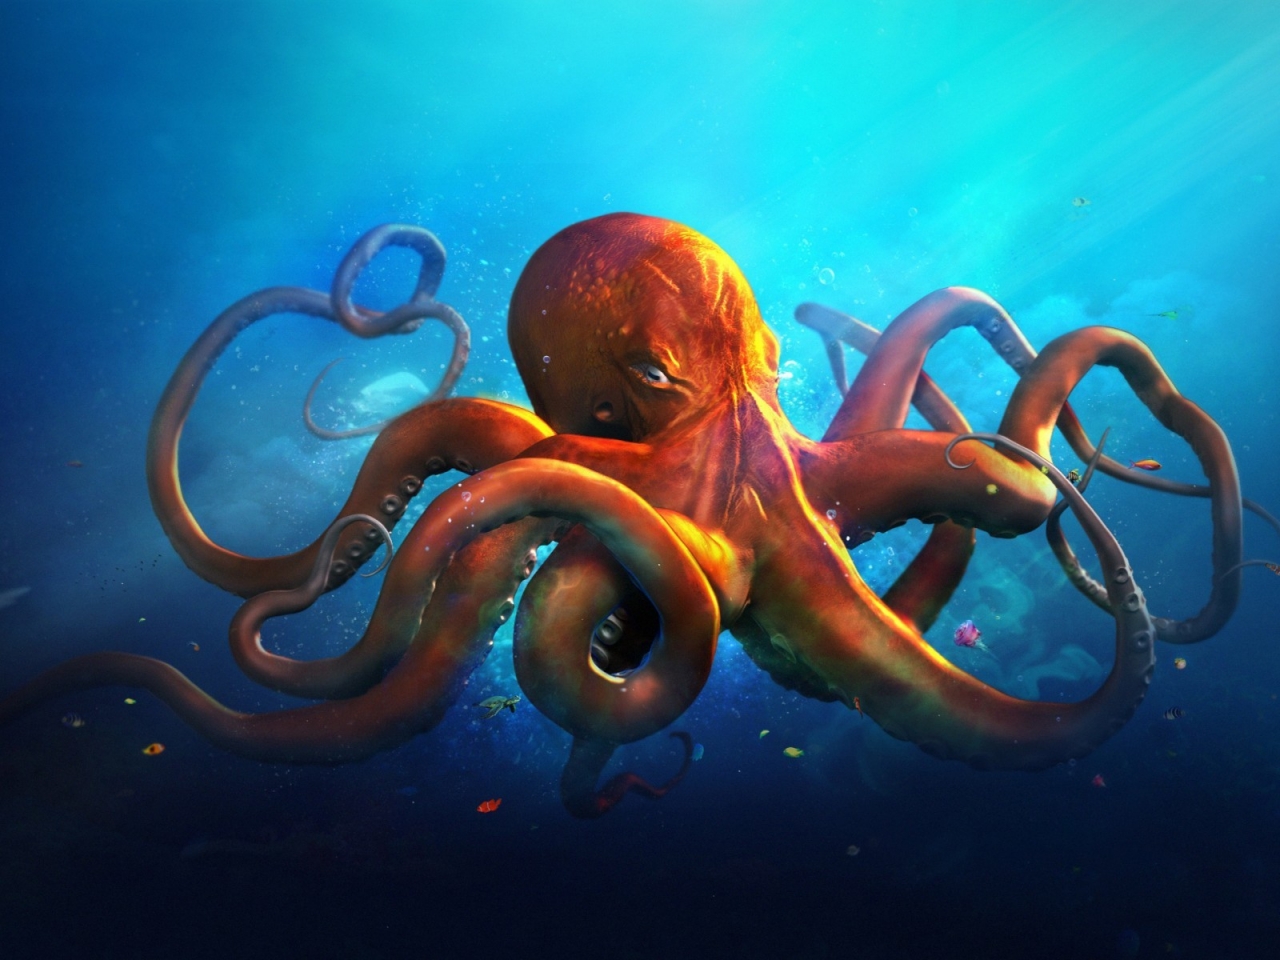 Just an Octopus for 1280 x 960 resolution